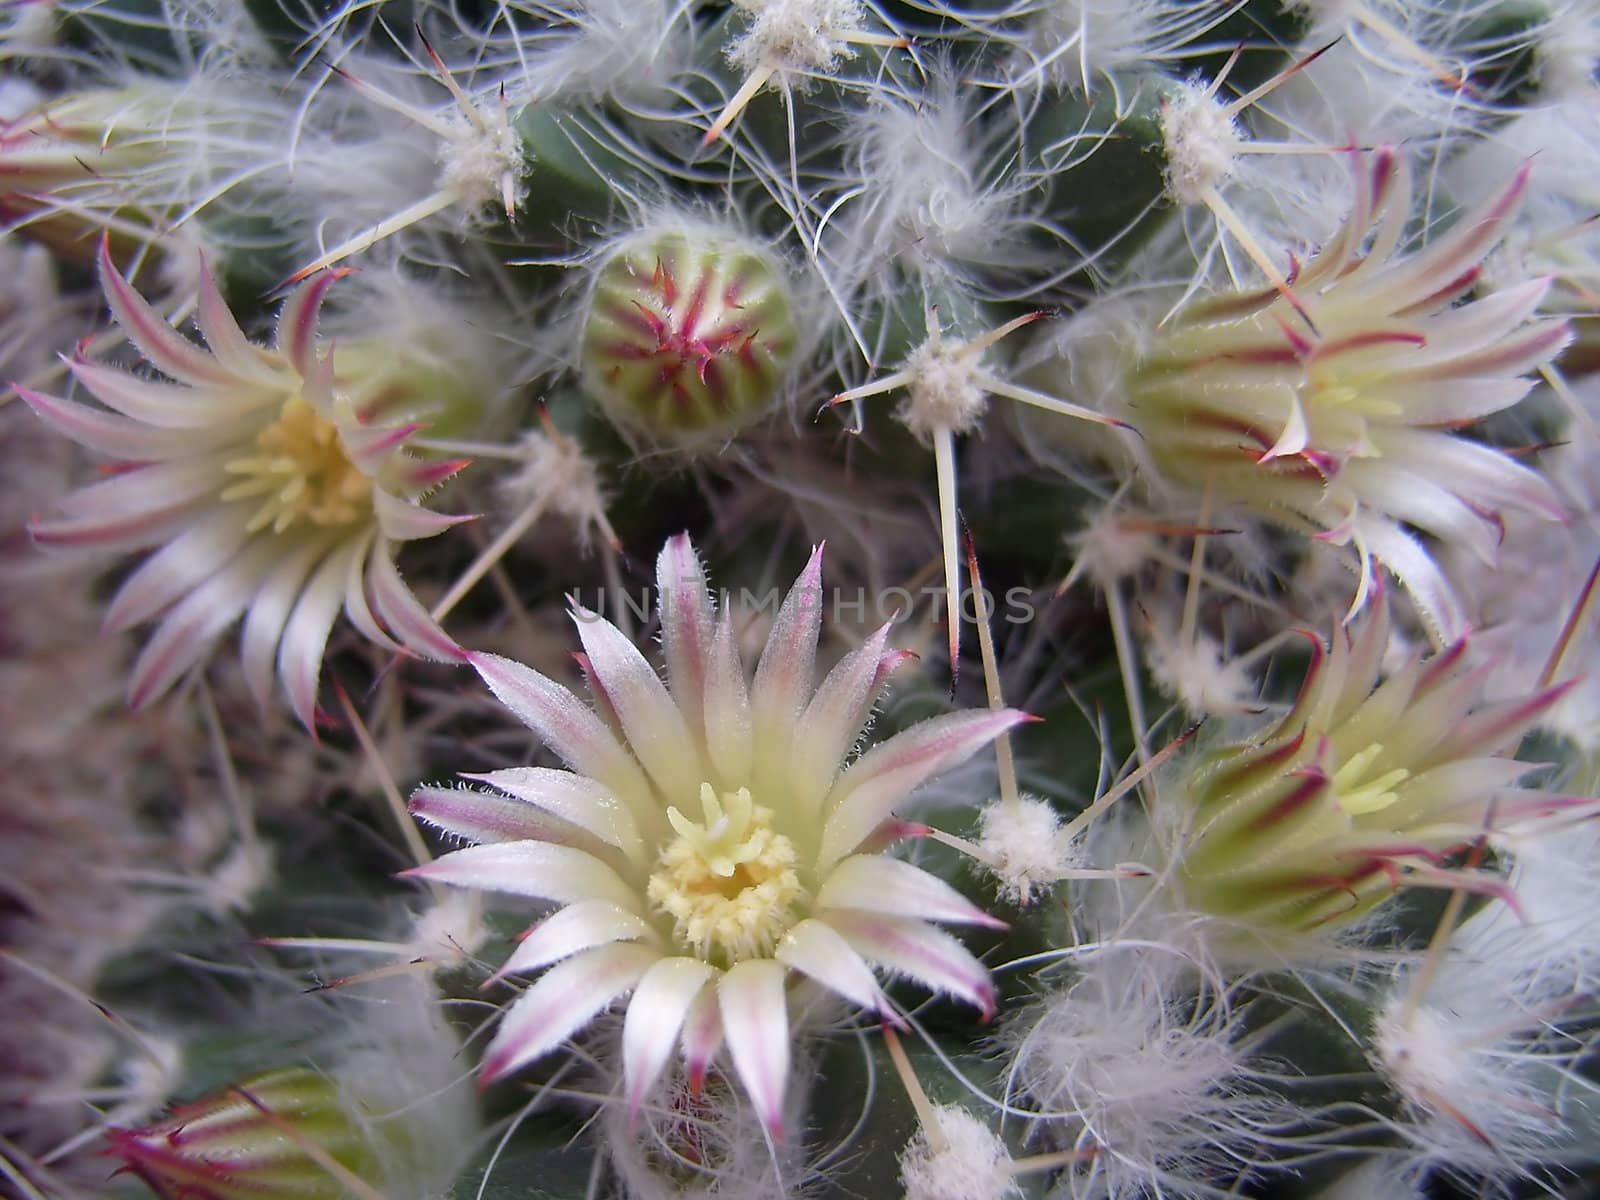 There has come spring. Cactus flowers were dismissed. It is a lot of them, they of yellow colour.